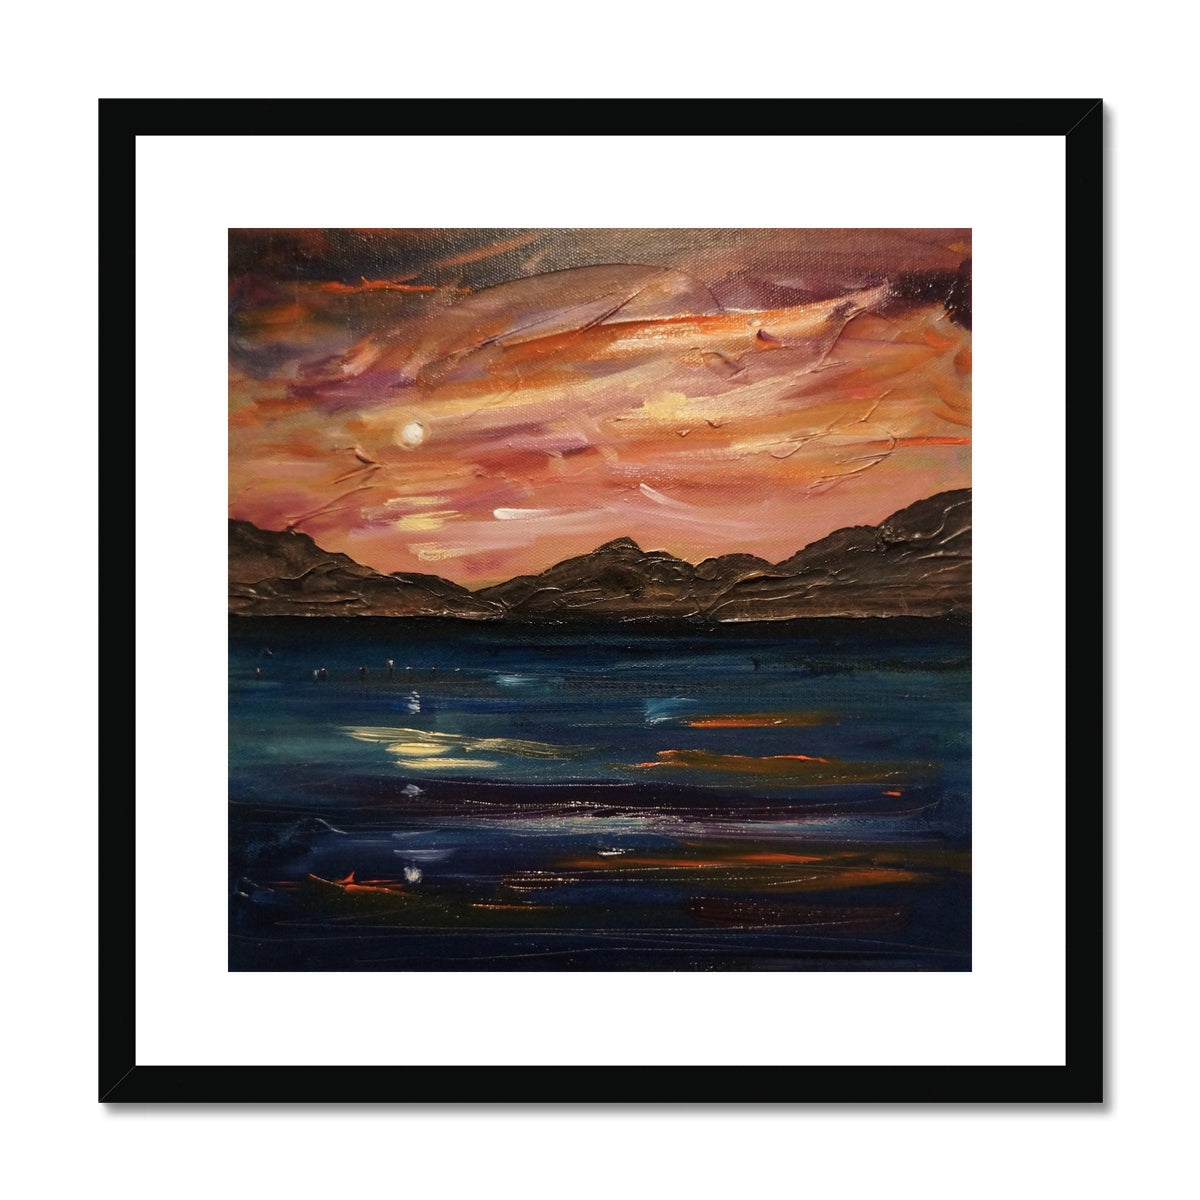 Loch Ness Moonset Painting | Framed & Mounted Prints From Scotland-Framed & Mounted Prints-Scottish Lochs & Mountains Art Gallery-20"x20"-Black Frame-Paintings, Prints, Homeware, Art Gifts From Scotland By Scottish Artist Kevin Hunter